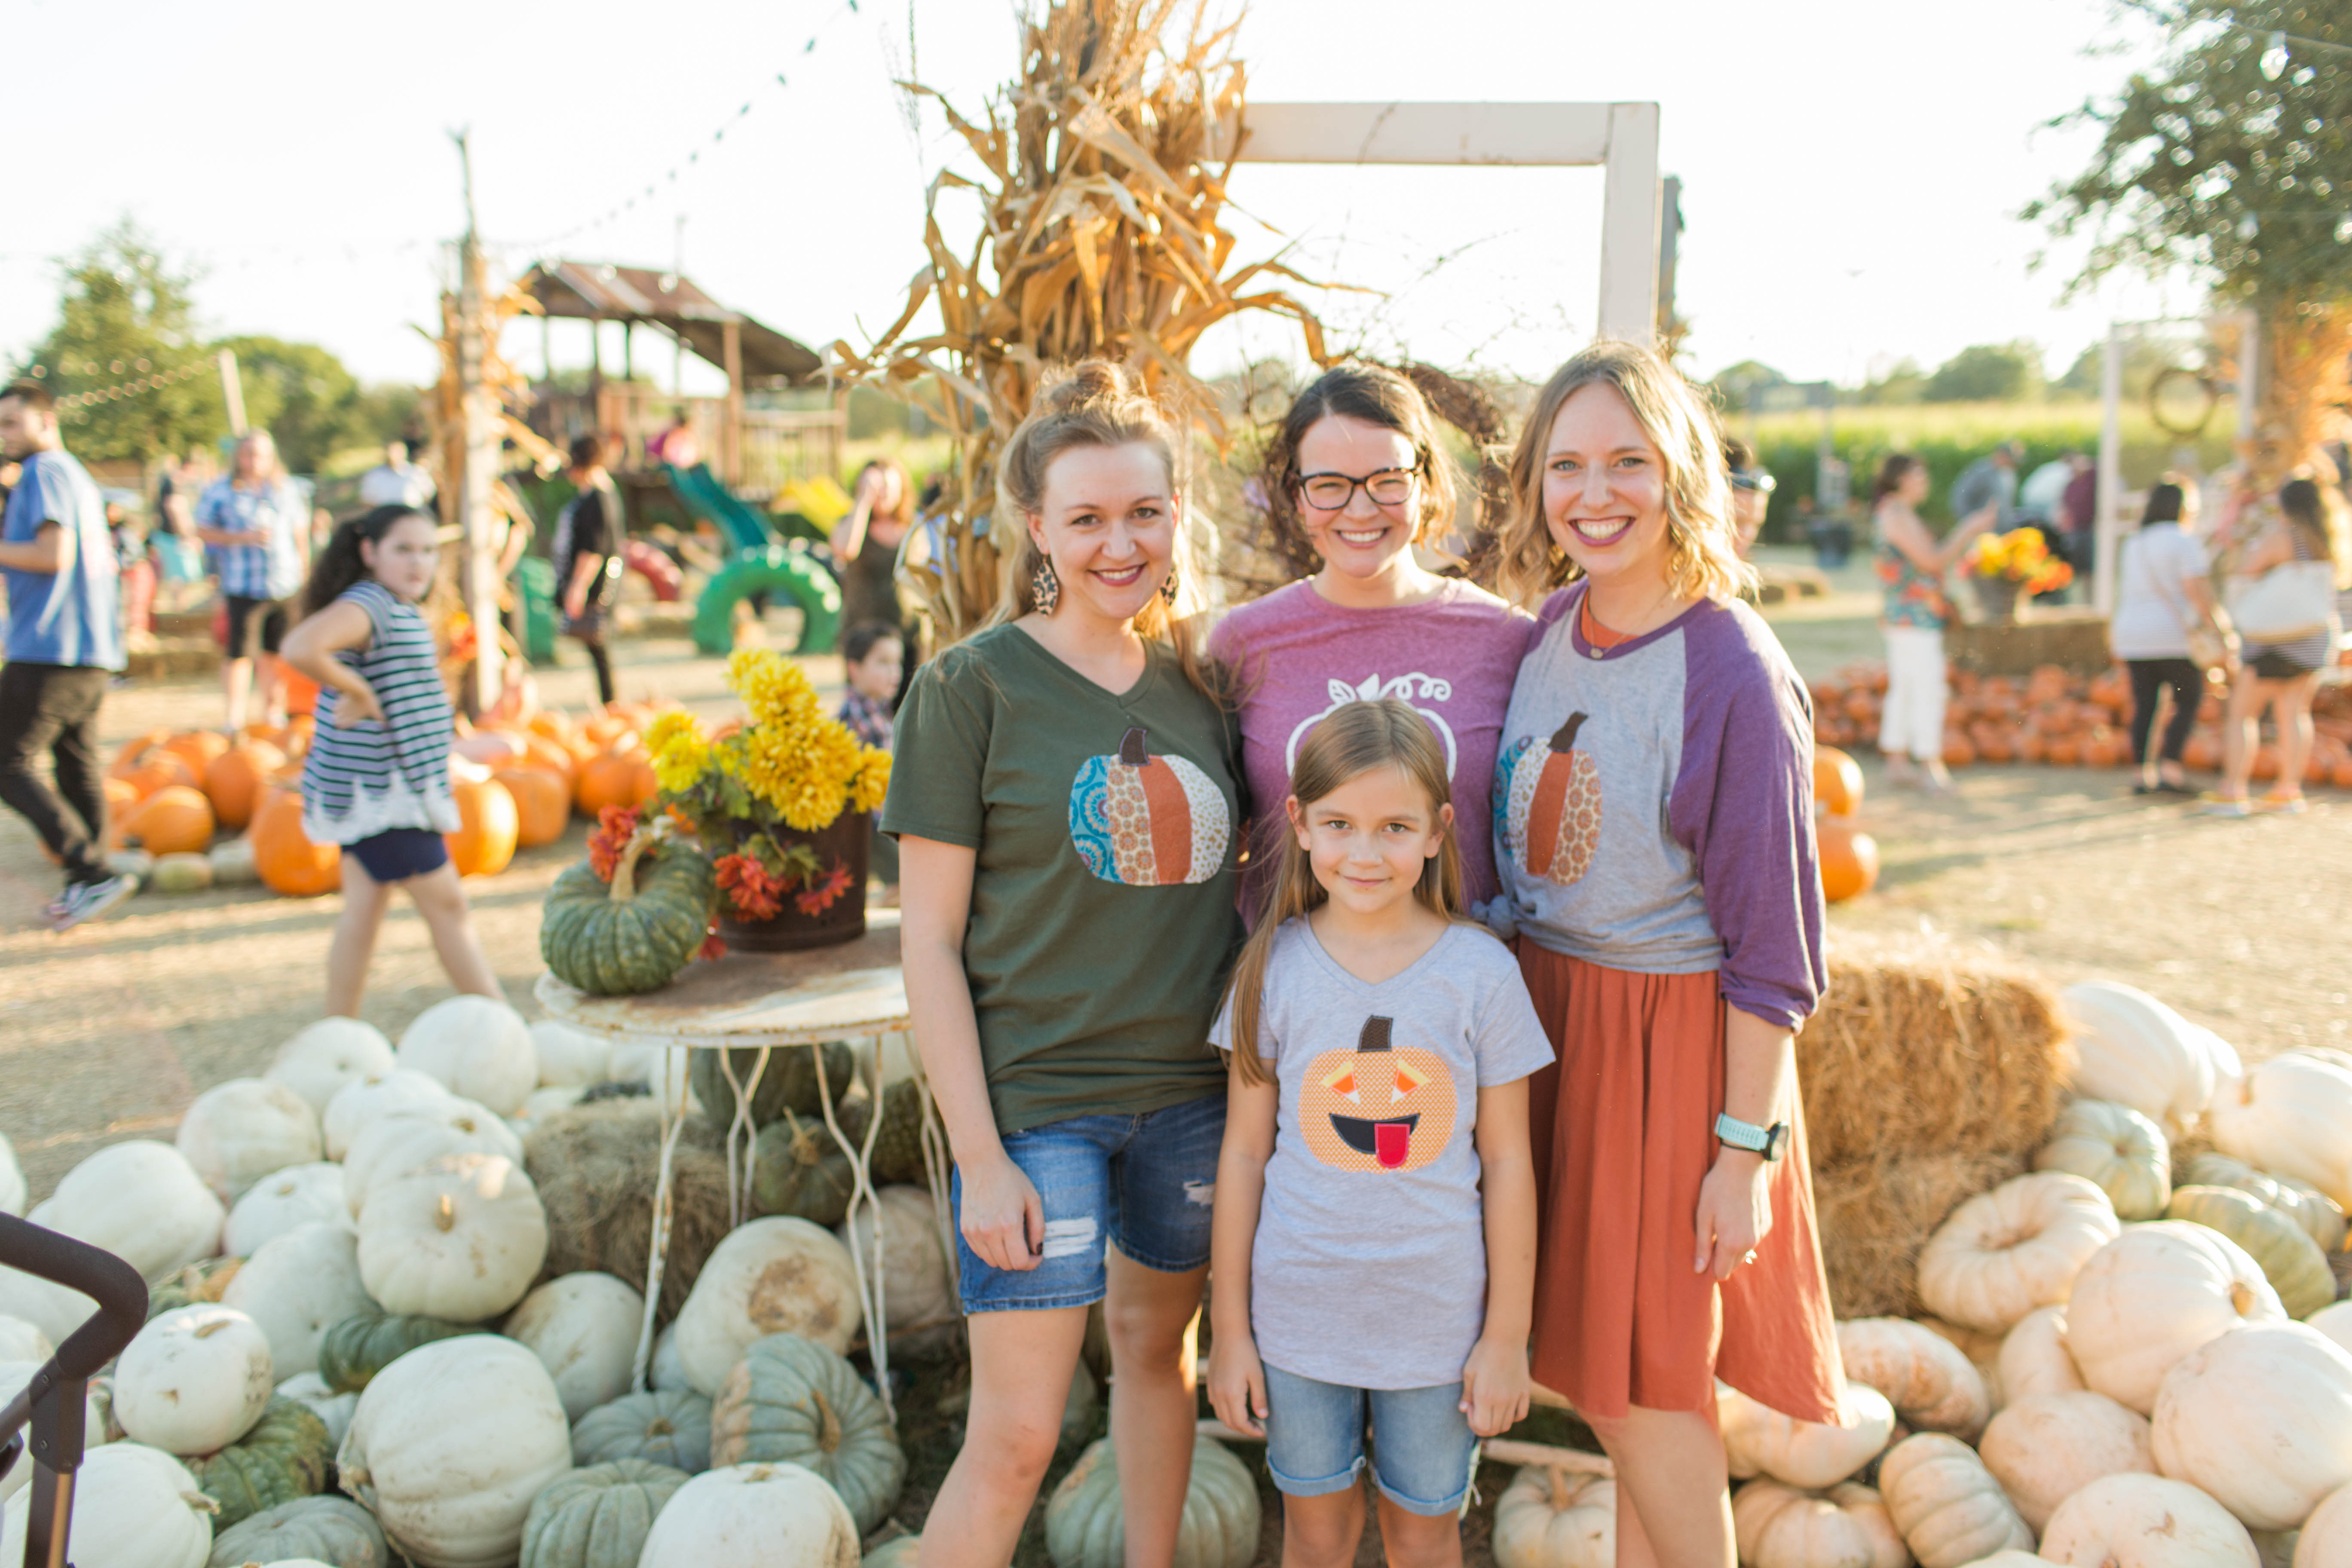 Pumpkin Patch Pictures | Becca Sue Photography - beccasuephotography.com